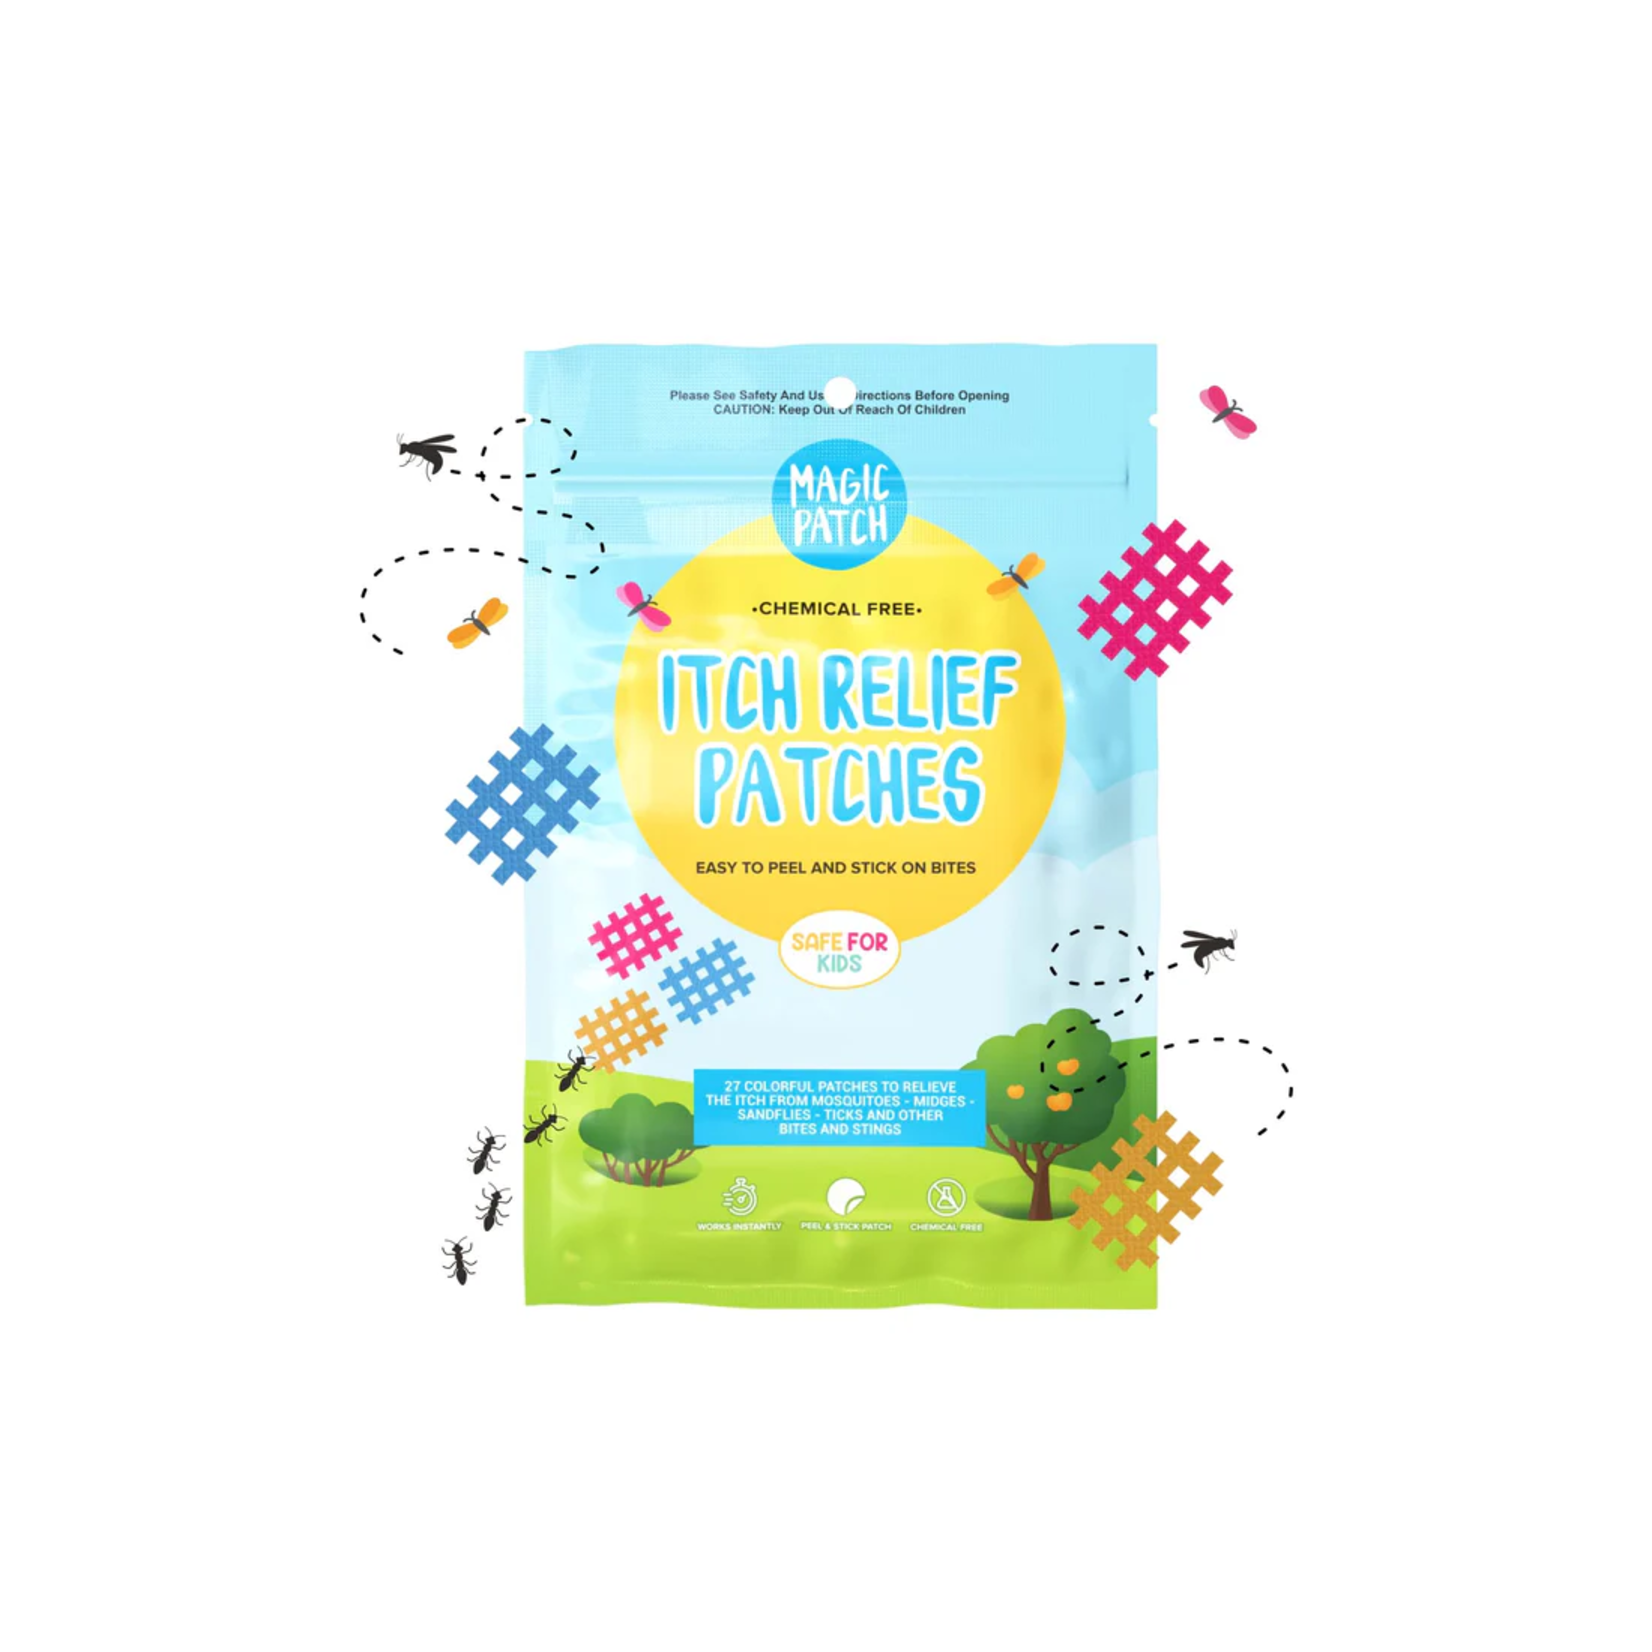 The Natural Patch MagicPatch Itch Relief Patches